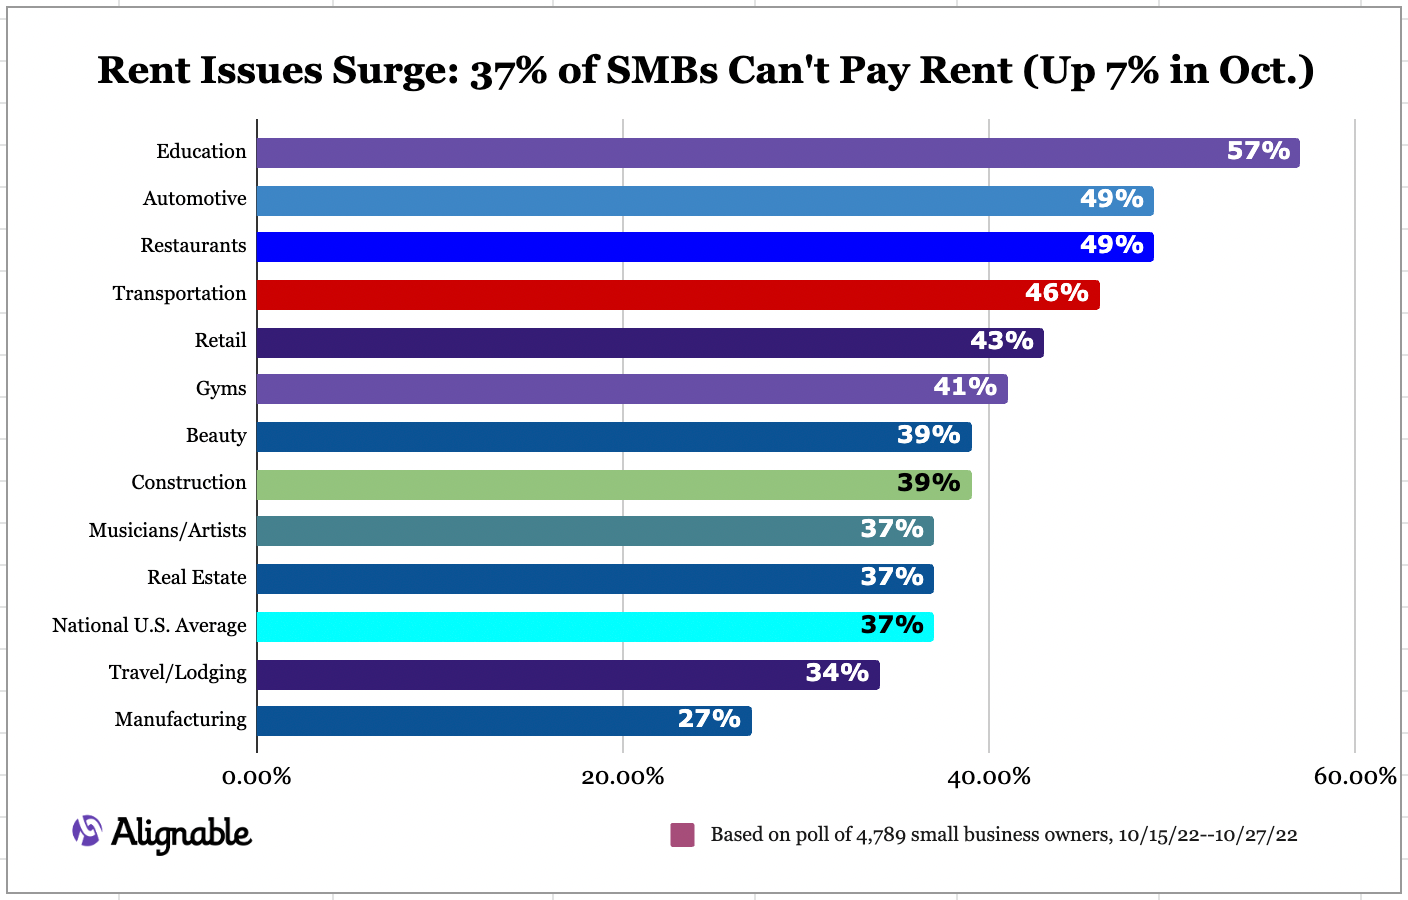 Record Surge In Rent Delinquency: Up 7% In October, Totaling 37% For U.S. SMBs - Alignable